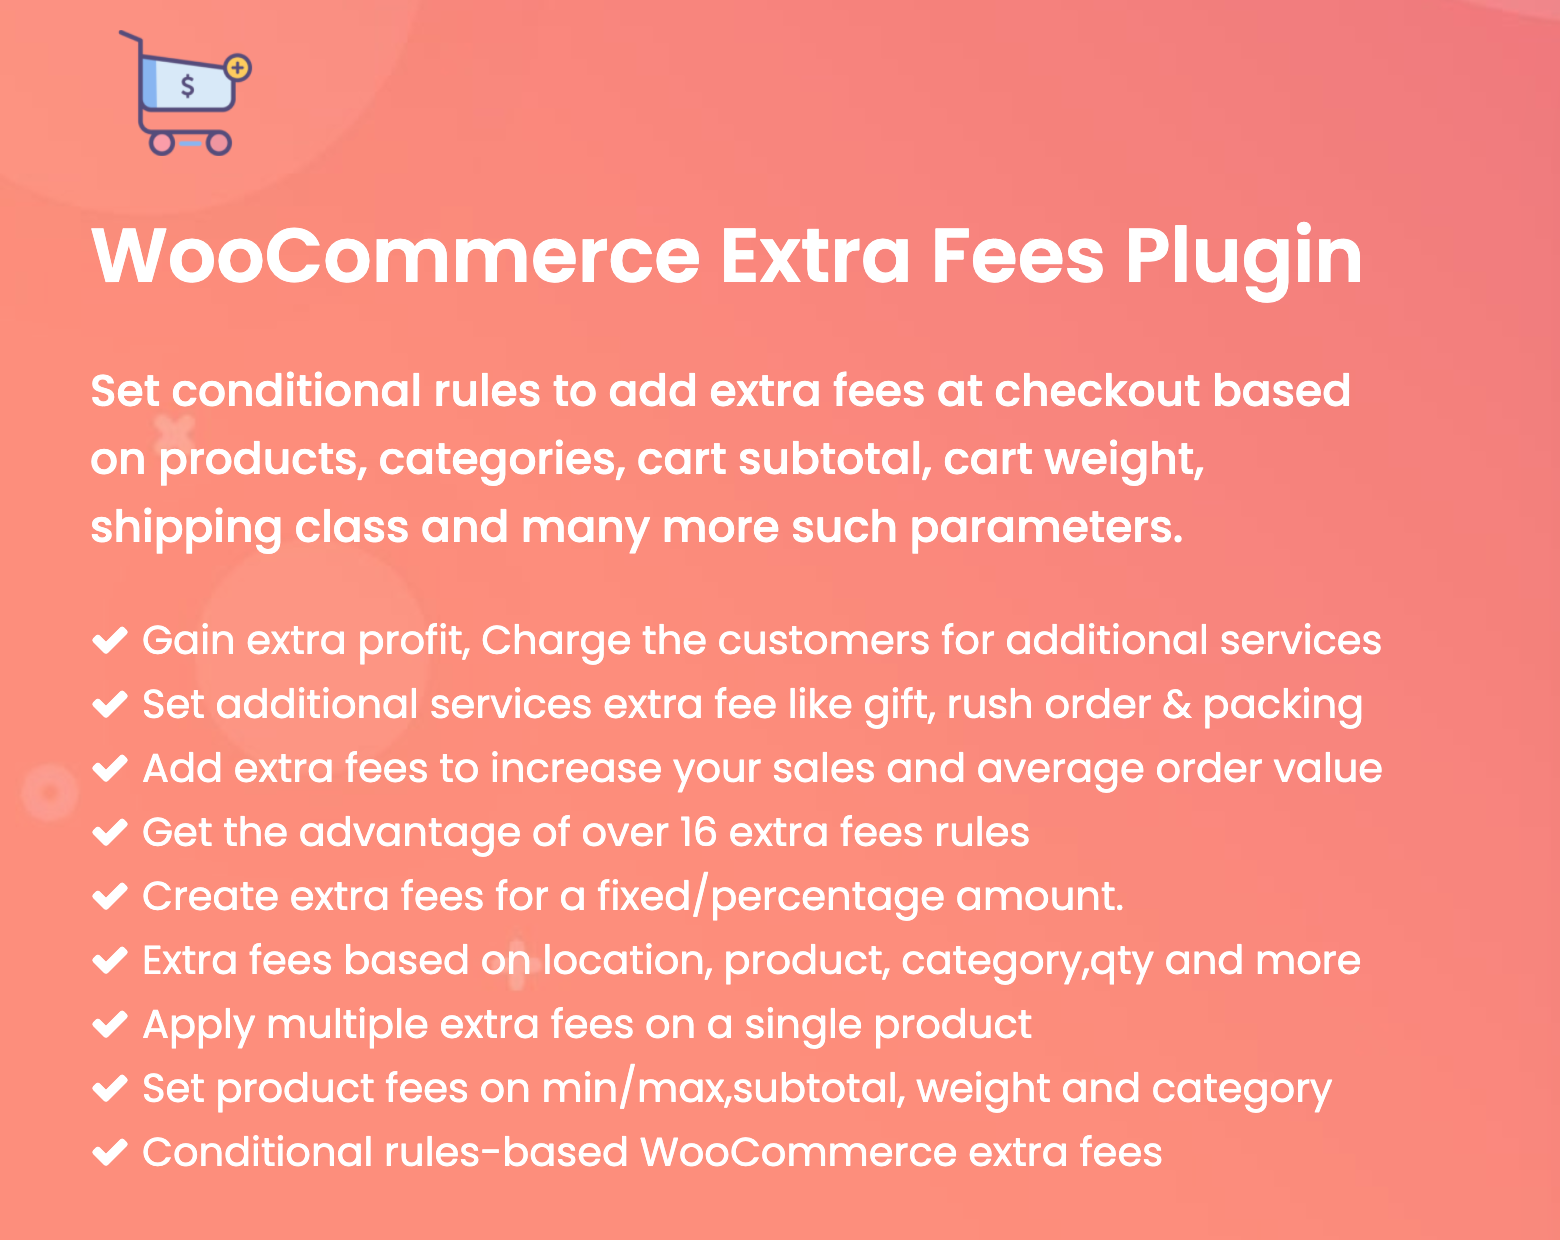 Figure 1 - WooCommerce Extra Fee Plugin and its features